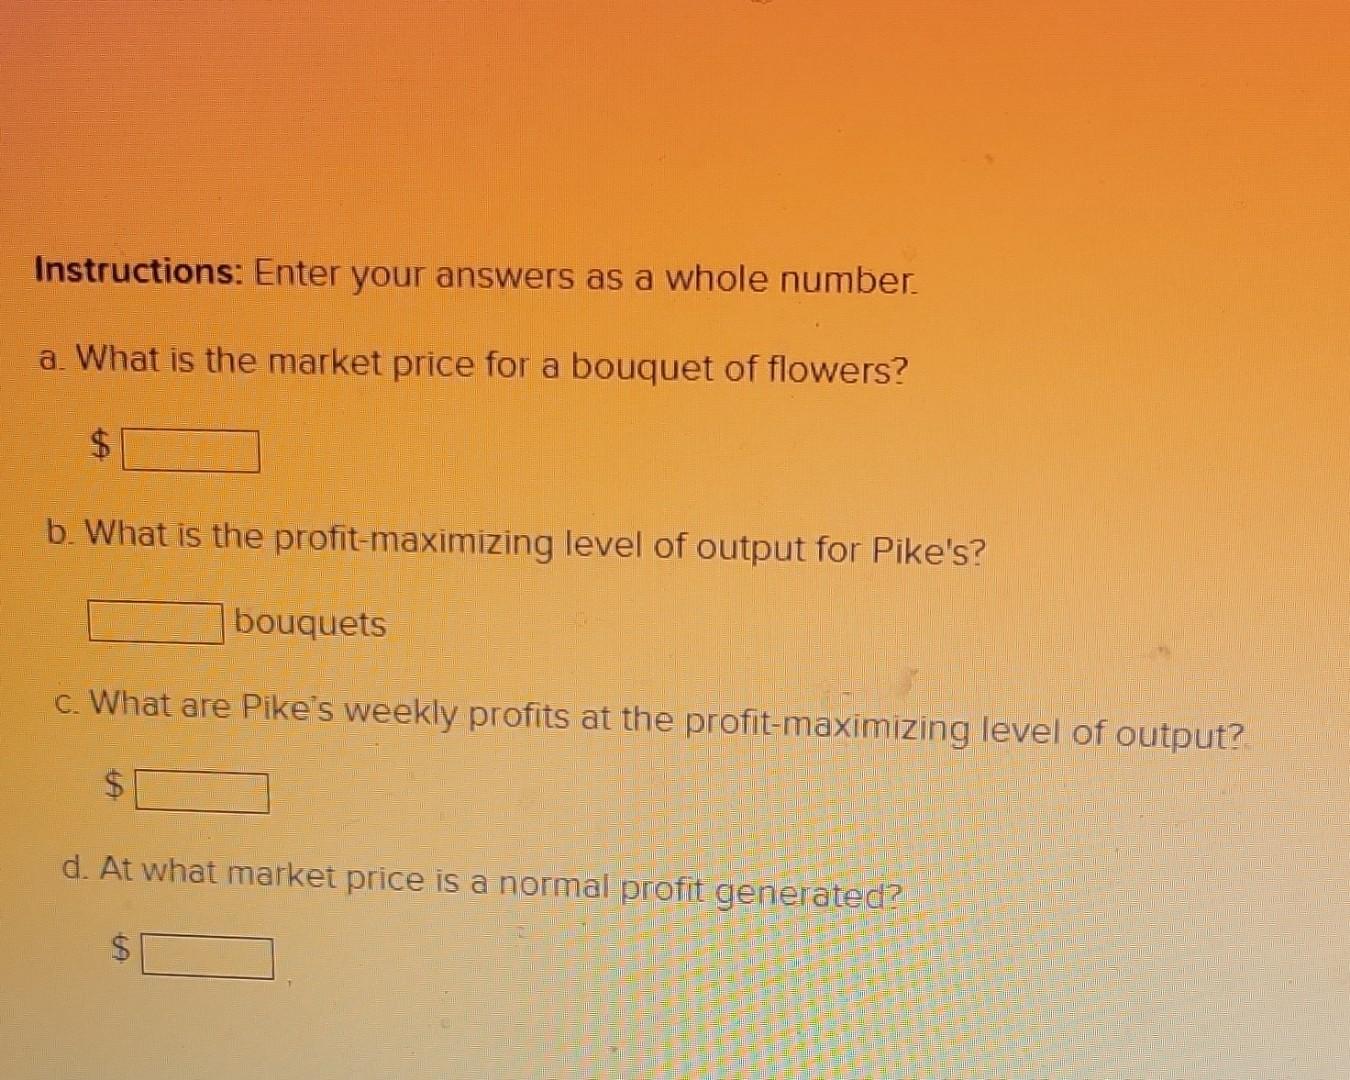 Instructions: Enter your answers as a whole number. a. What is the market price for a bouquet of flowers? $